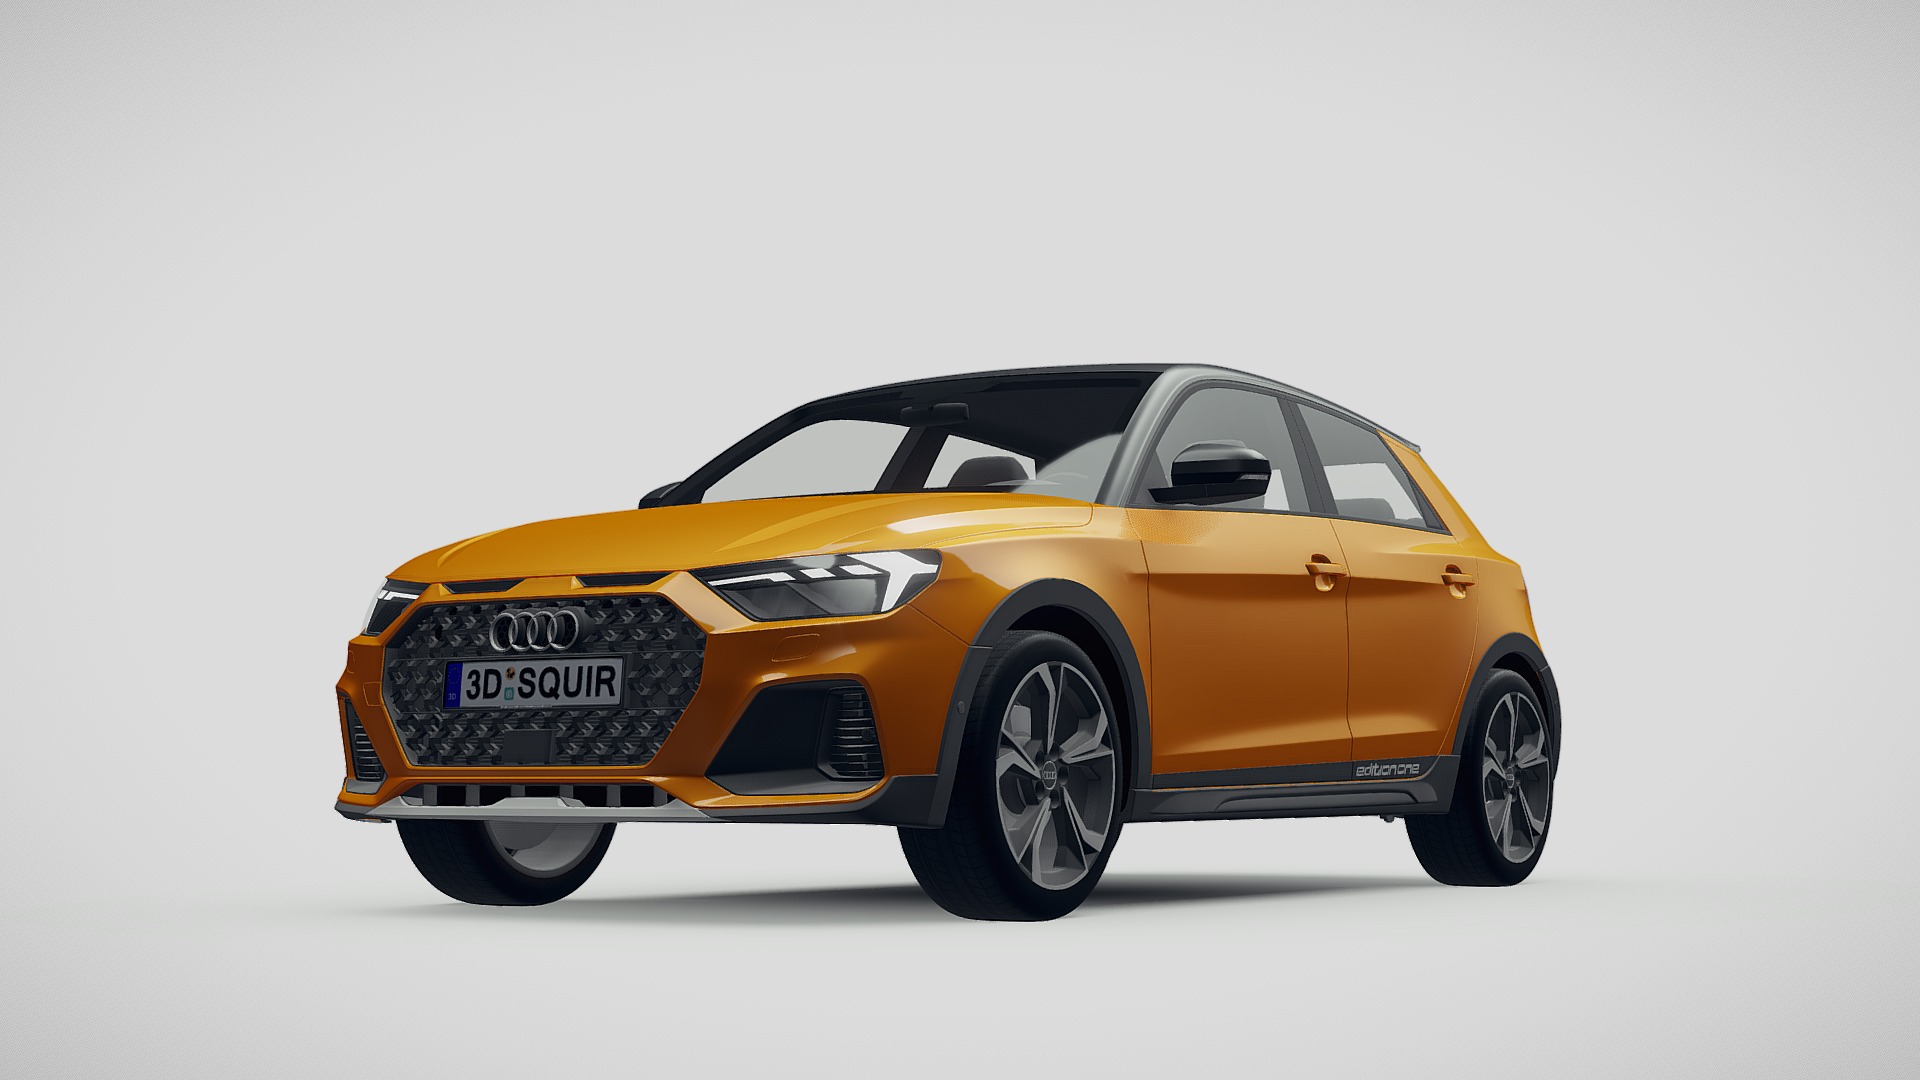 3D model Audi A1 Citycarver 2020 - This is a 3D model of the Audi A1 Citycarver 2020. The 3D model is about a yellow car with a black roof.